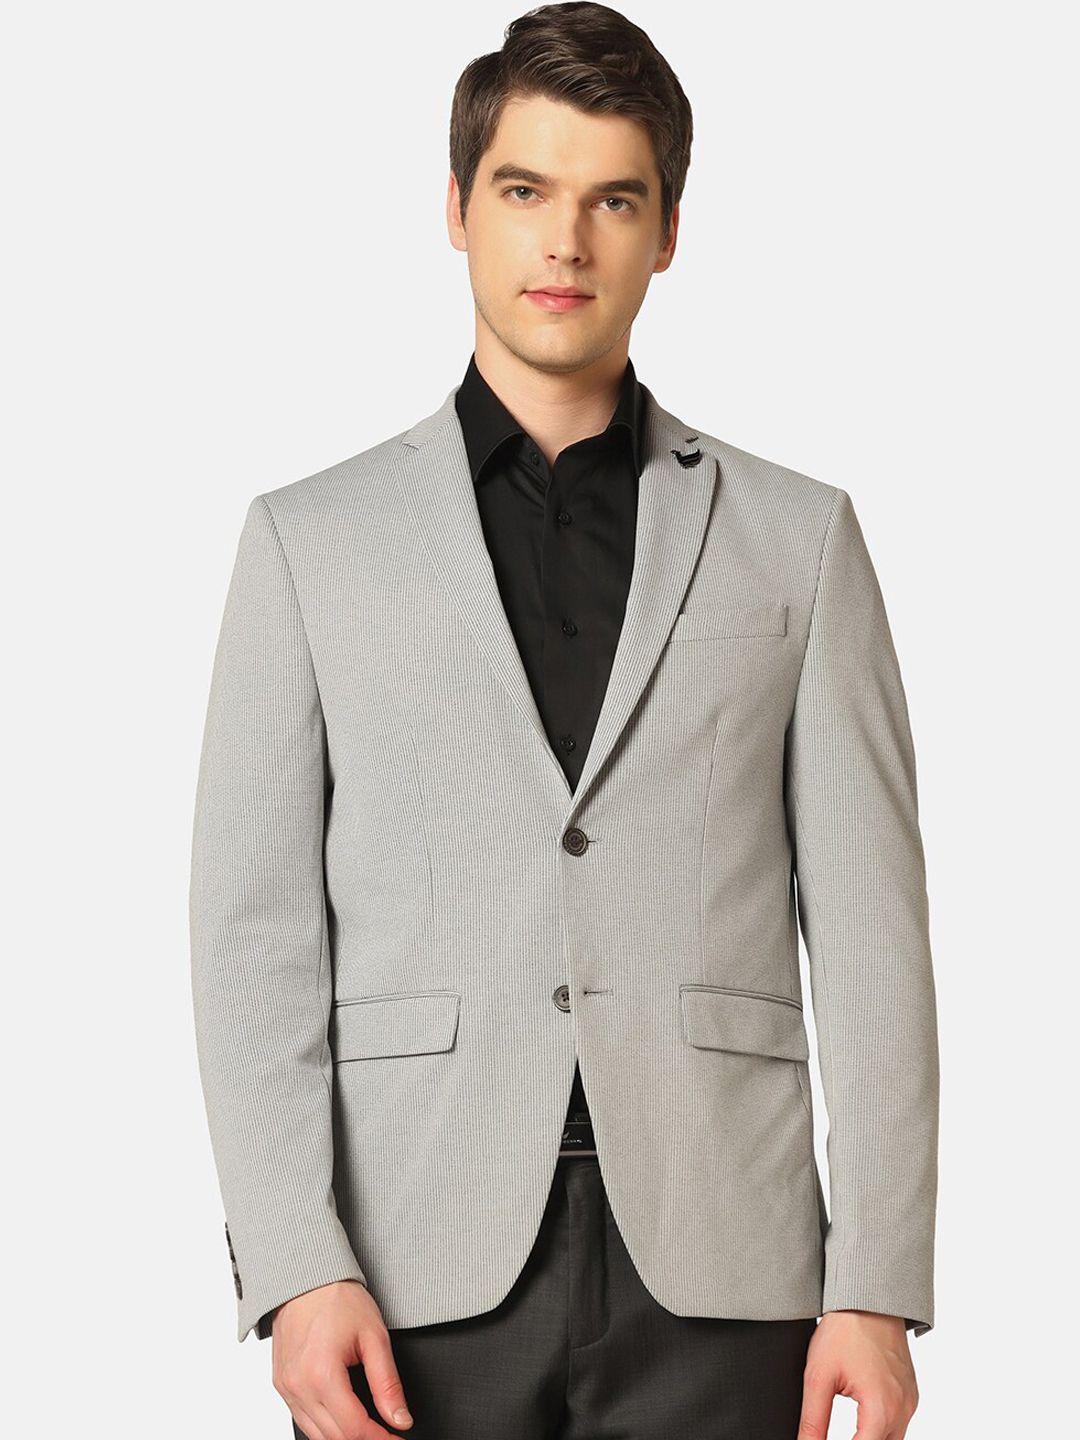 blackberrys notched lapel collar striped slim-fit single-breasted formal blazers